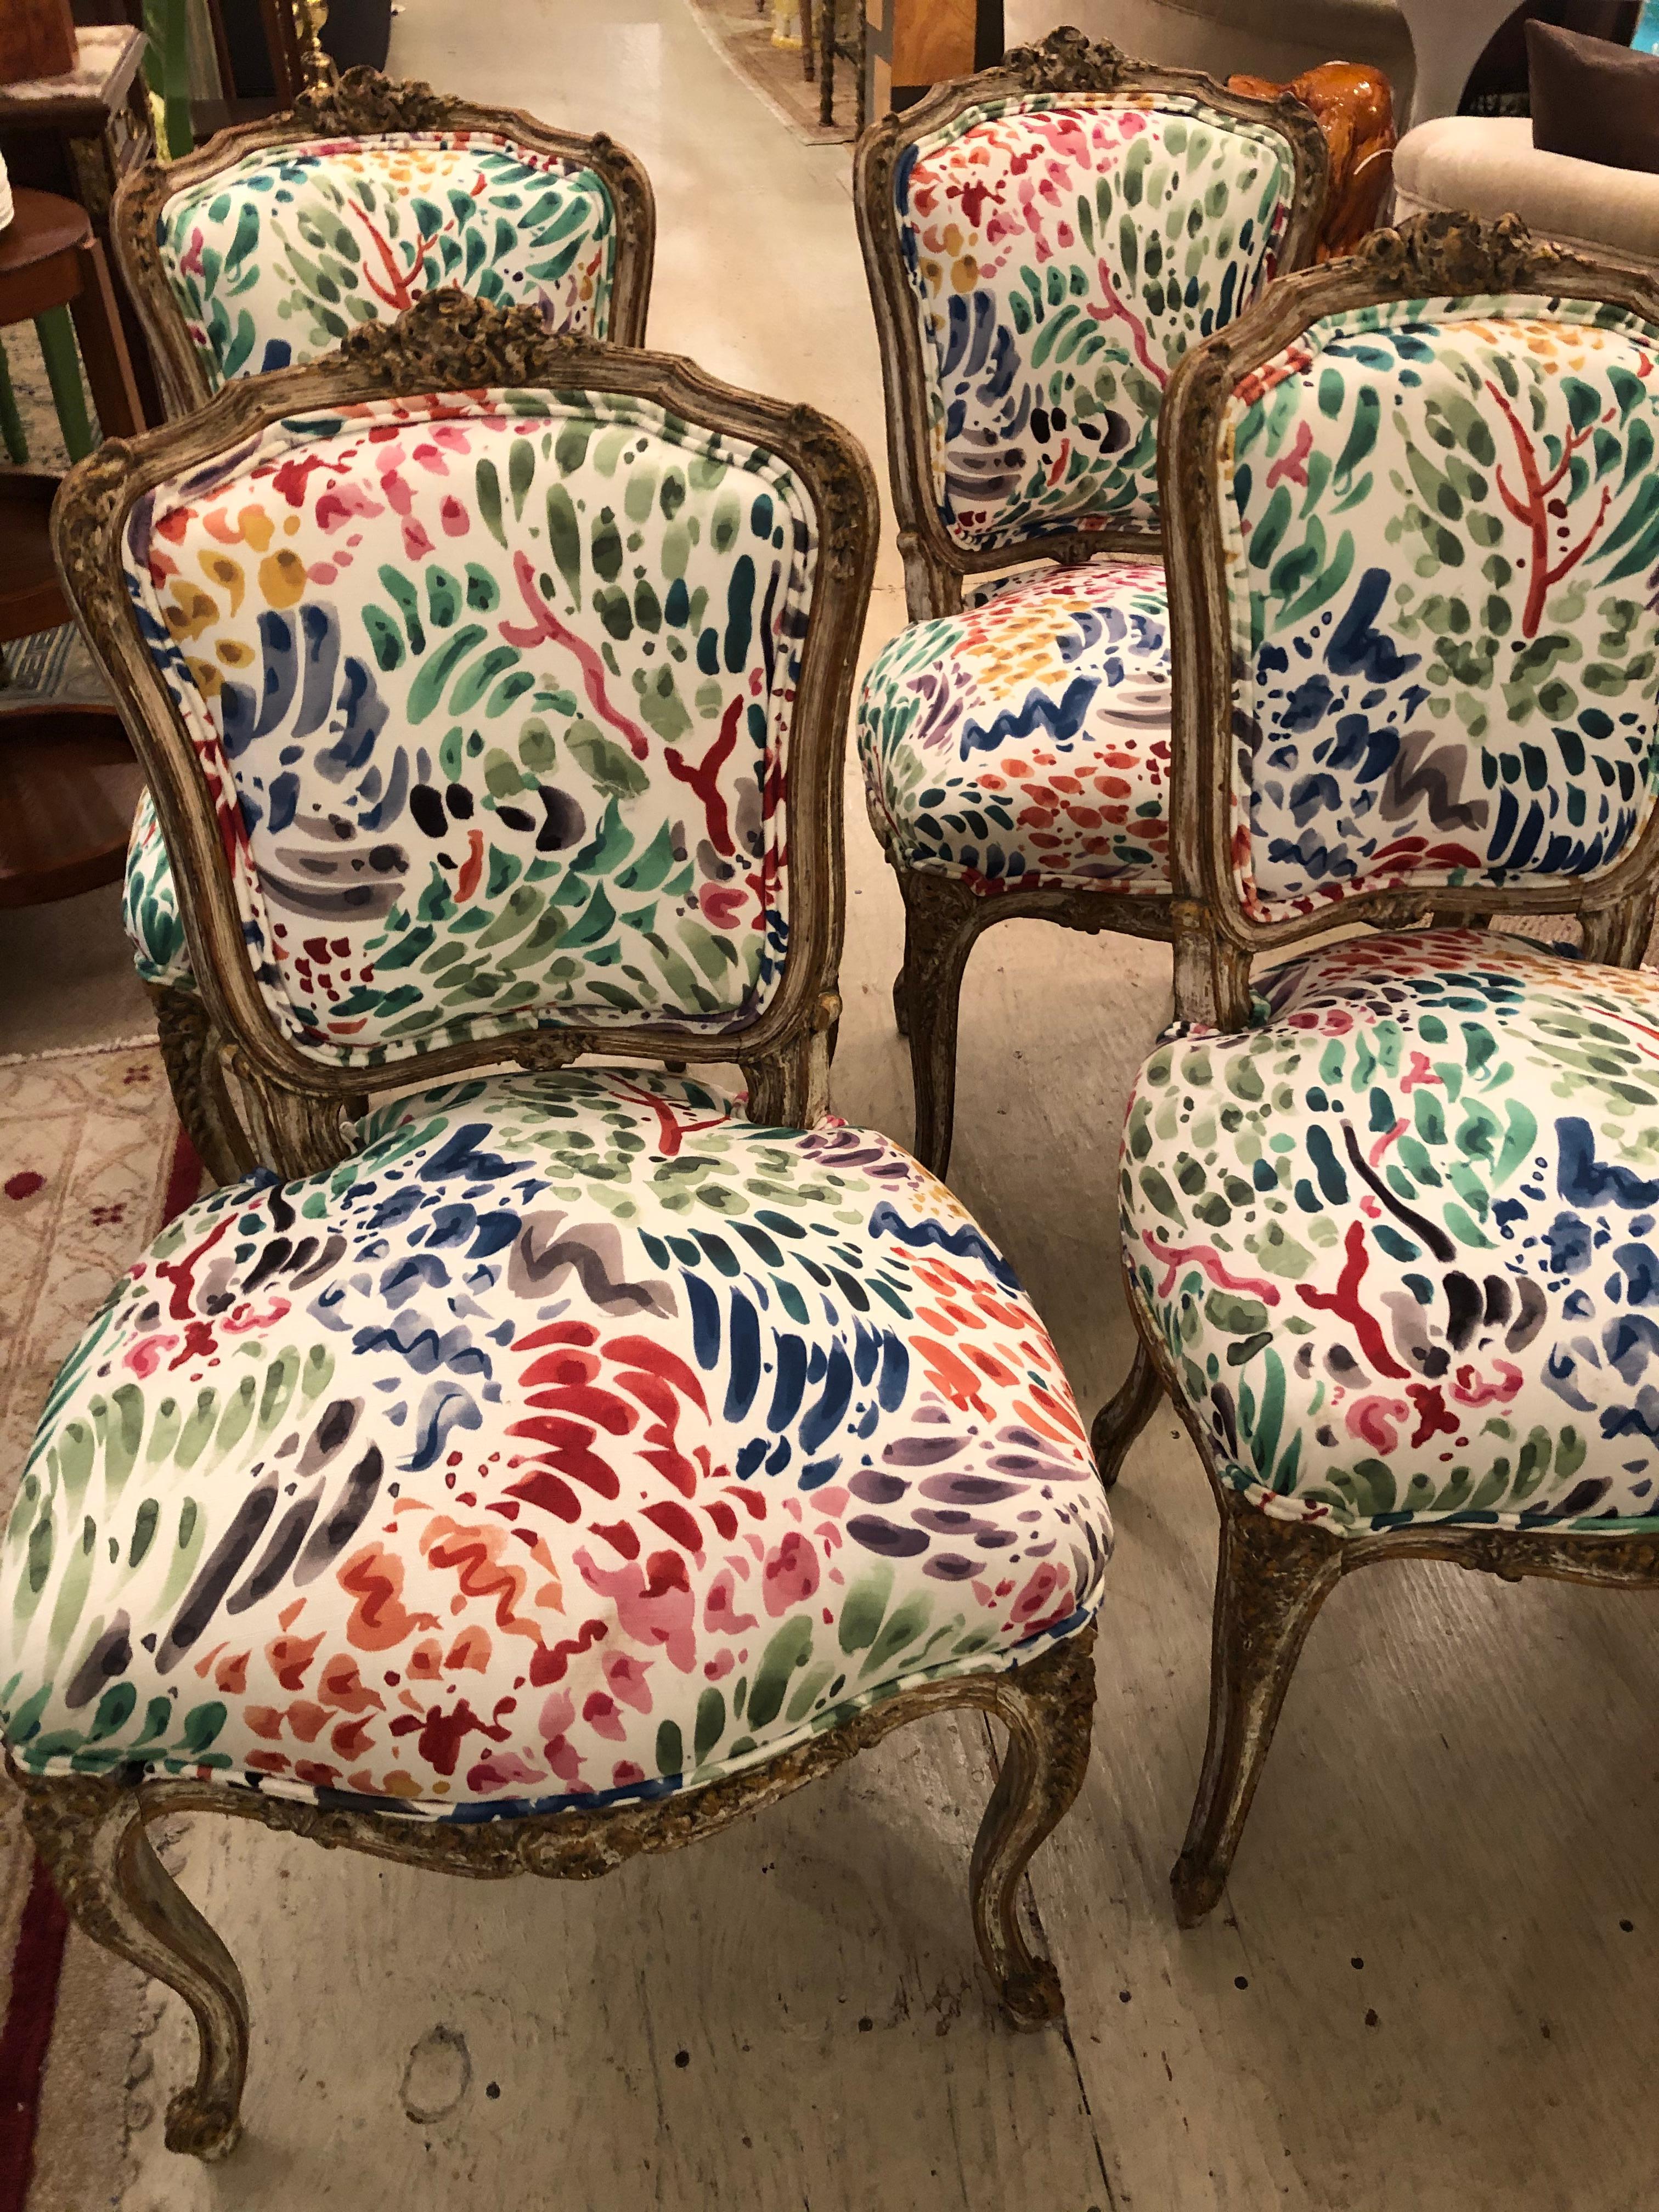 A chic adorable set of 4 Classic Louis XVI distressed painted carved wood side dining chairs, newly updated in a fun abstract pattern upholstery. Fabric has splashes of magenta, fushia, lime green and purple against a cream background. Wood has